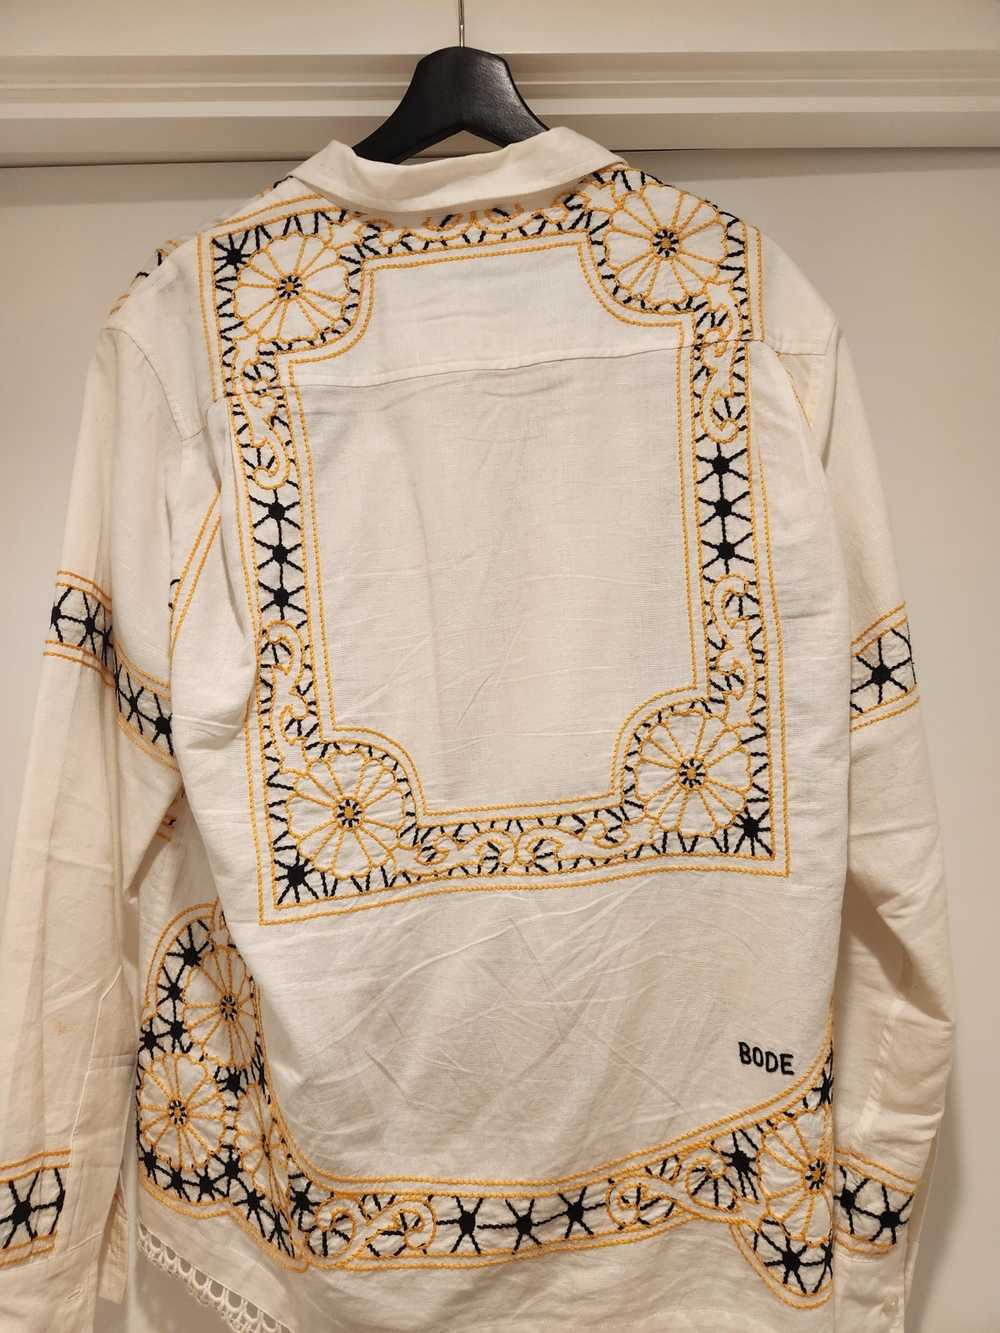 Bode Embroidered long-sleeved shirt - image 2